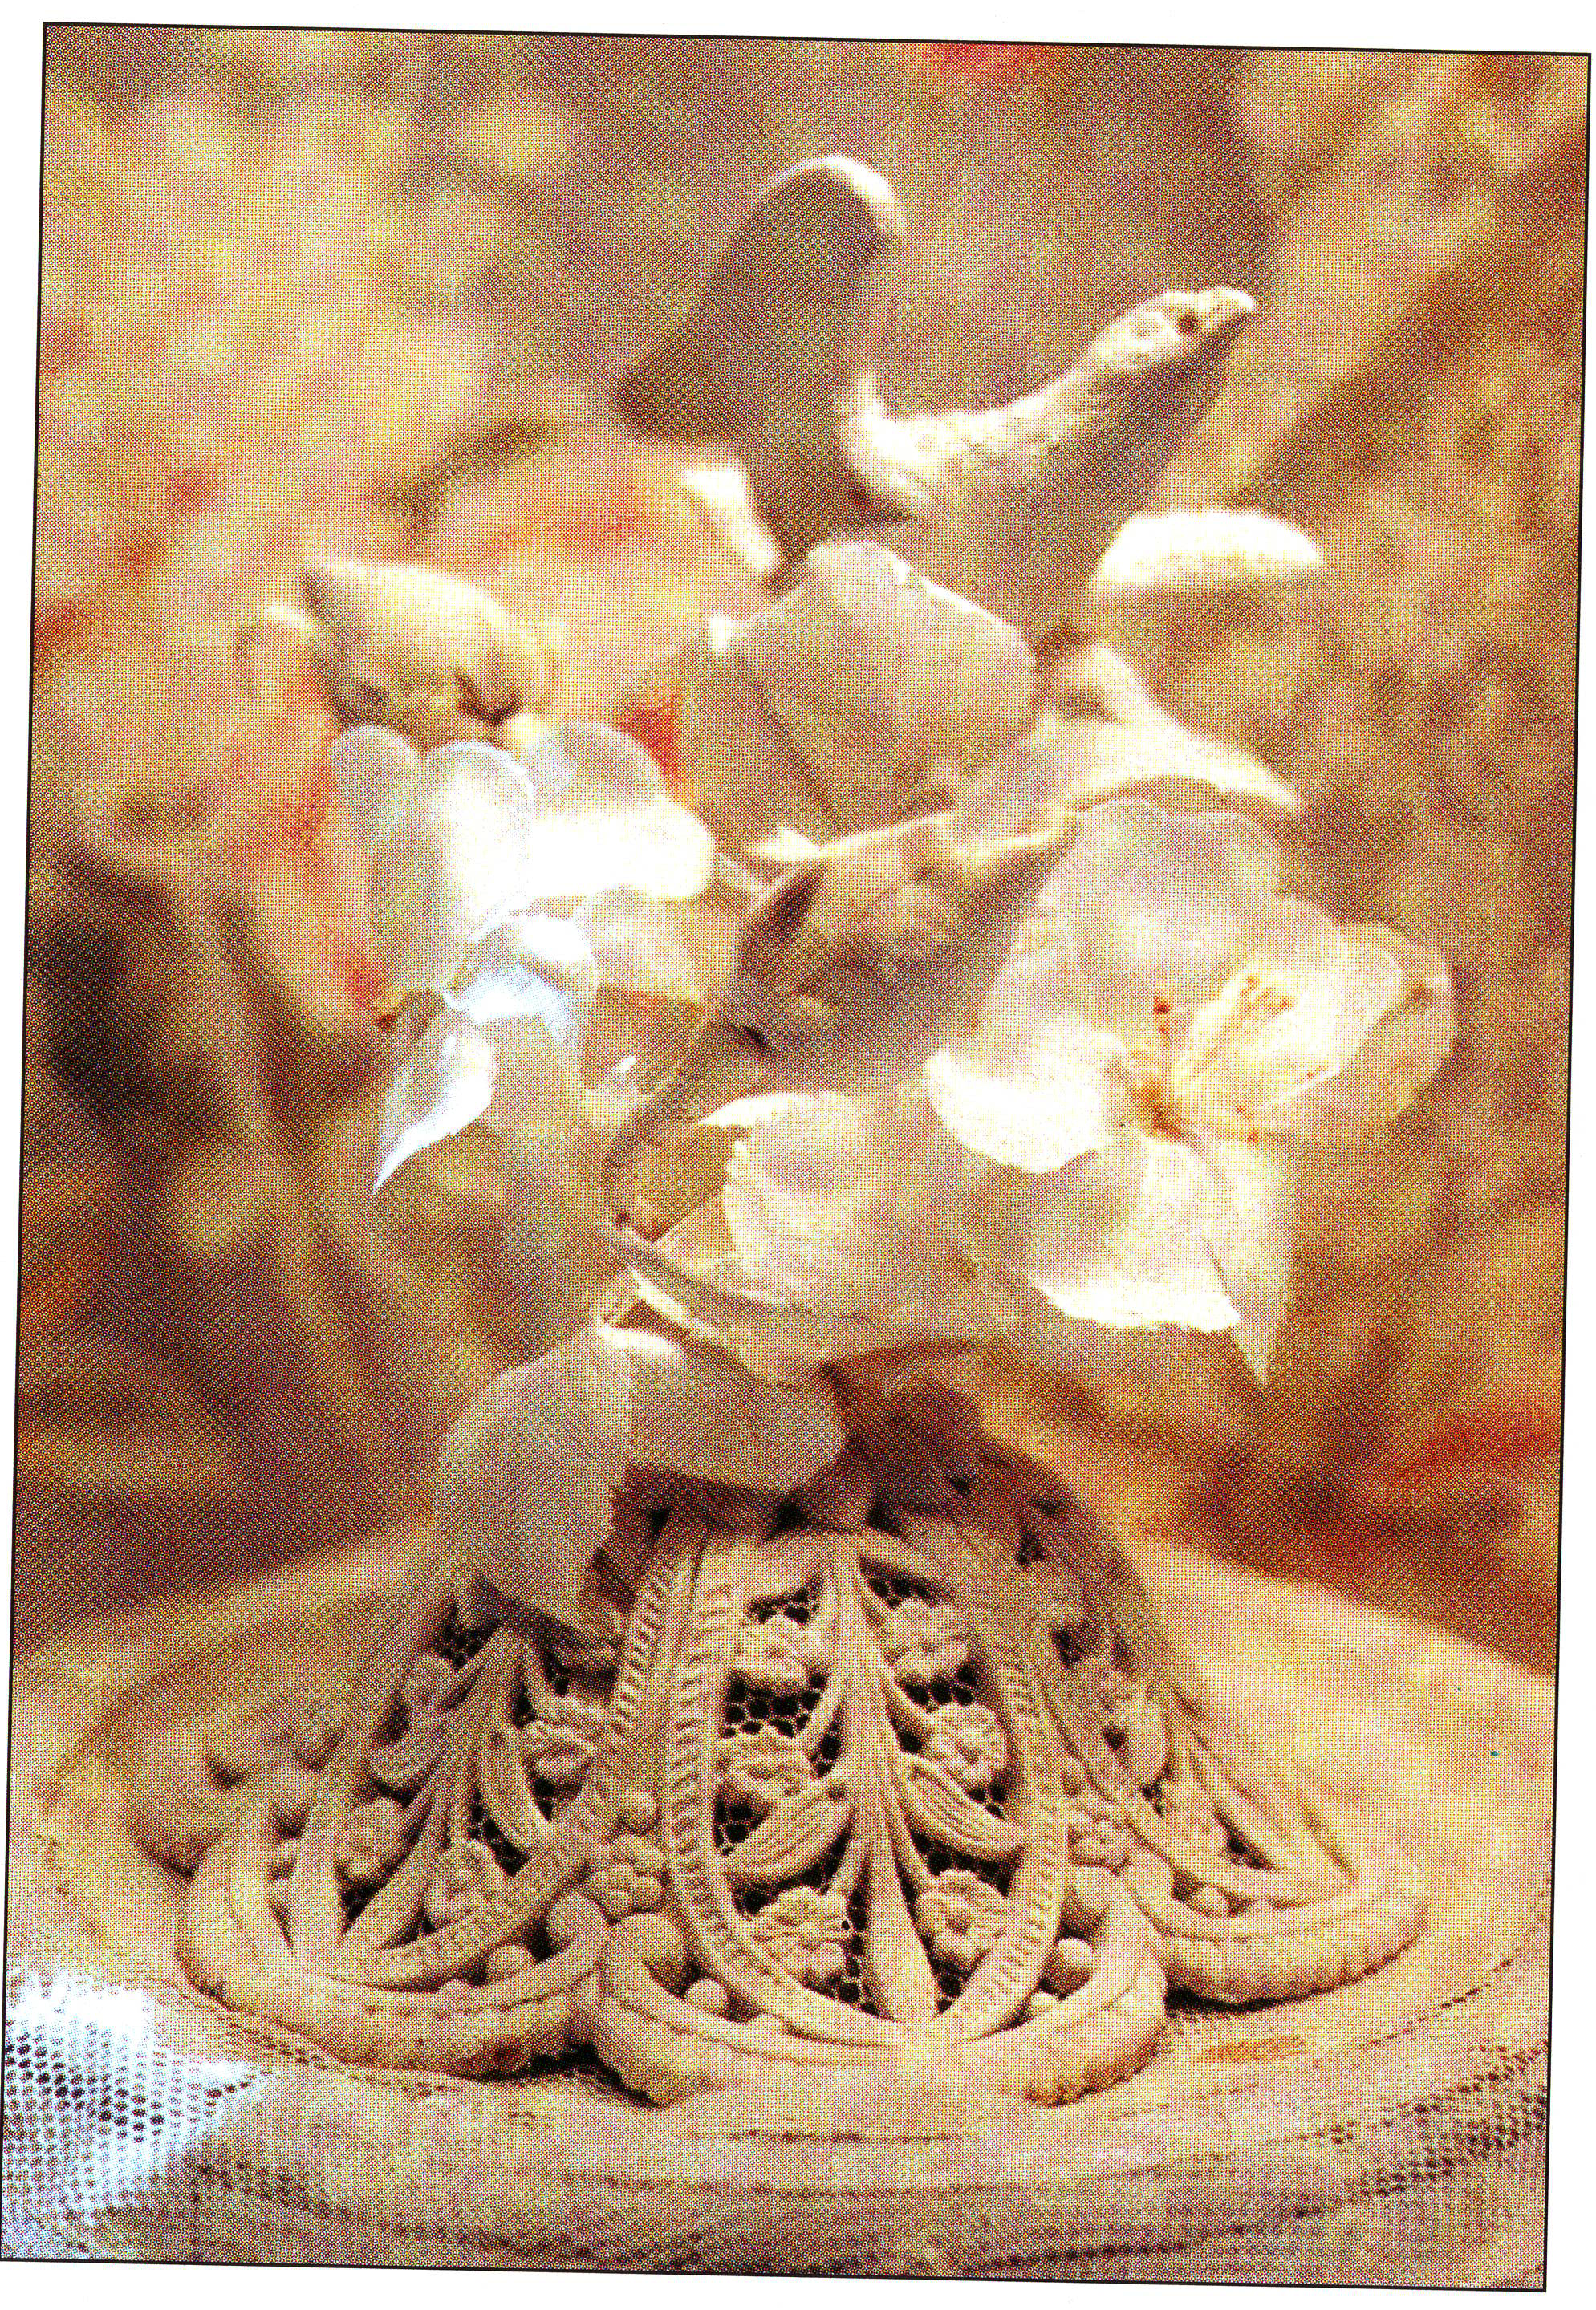 A modeled dove on a spray of flowers above a lace-like domed base